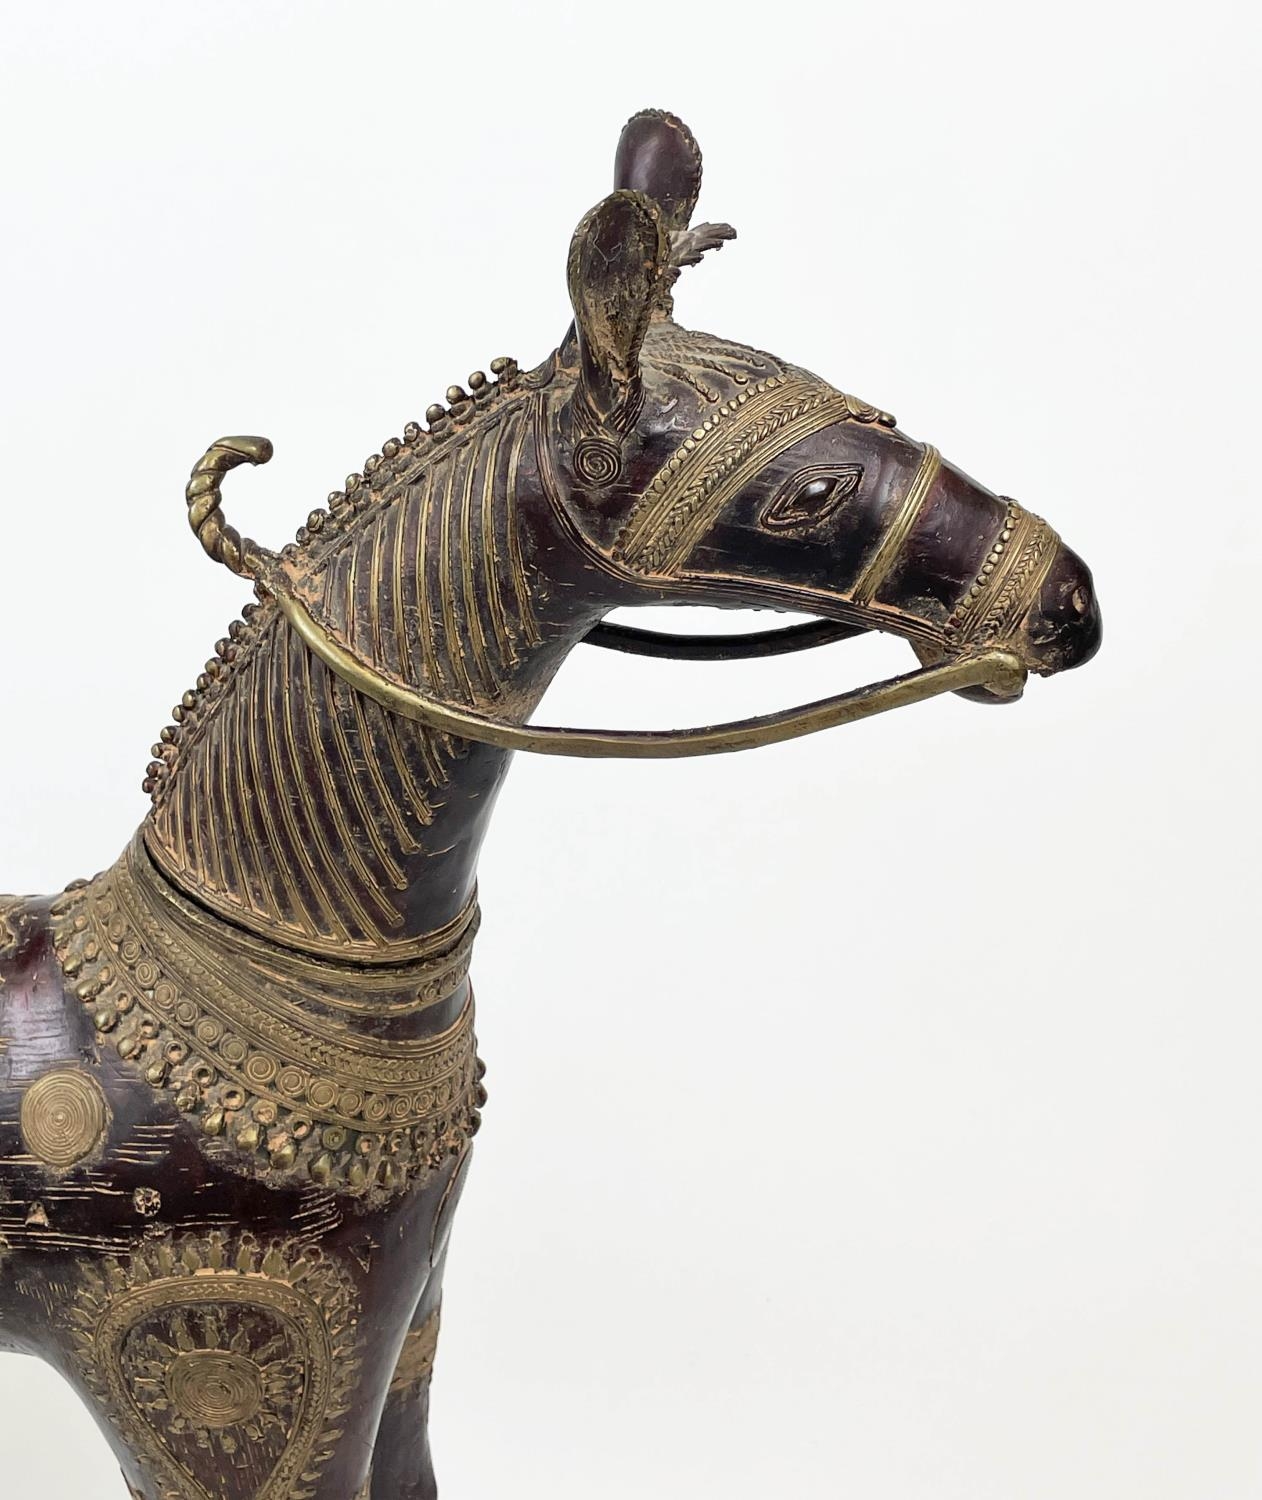 INDIAN BRONZE HORSE, embellished with saddle and decorative detail, 90cm L x 74cm H. - Image 2 of 5